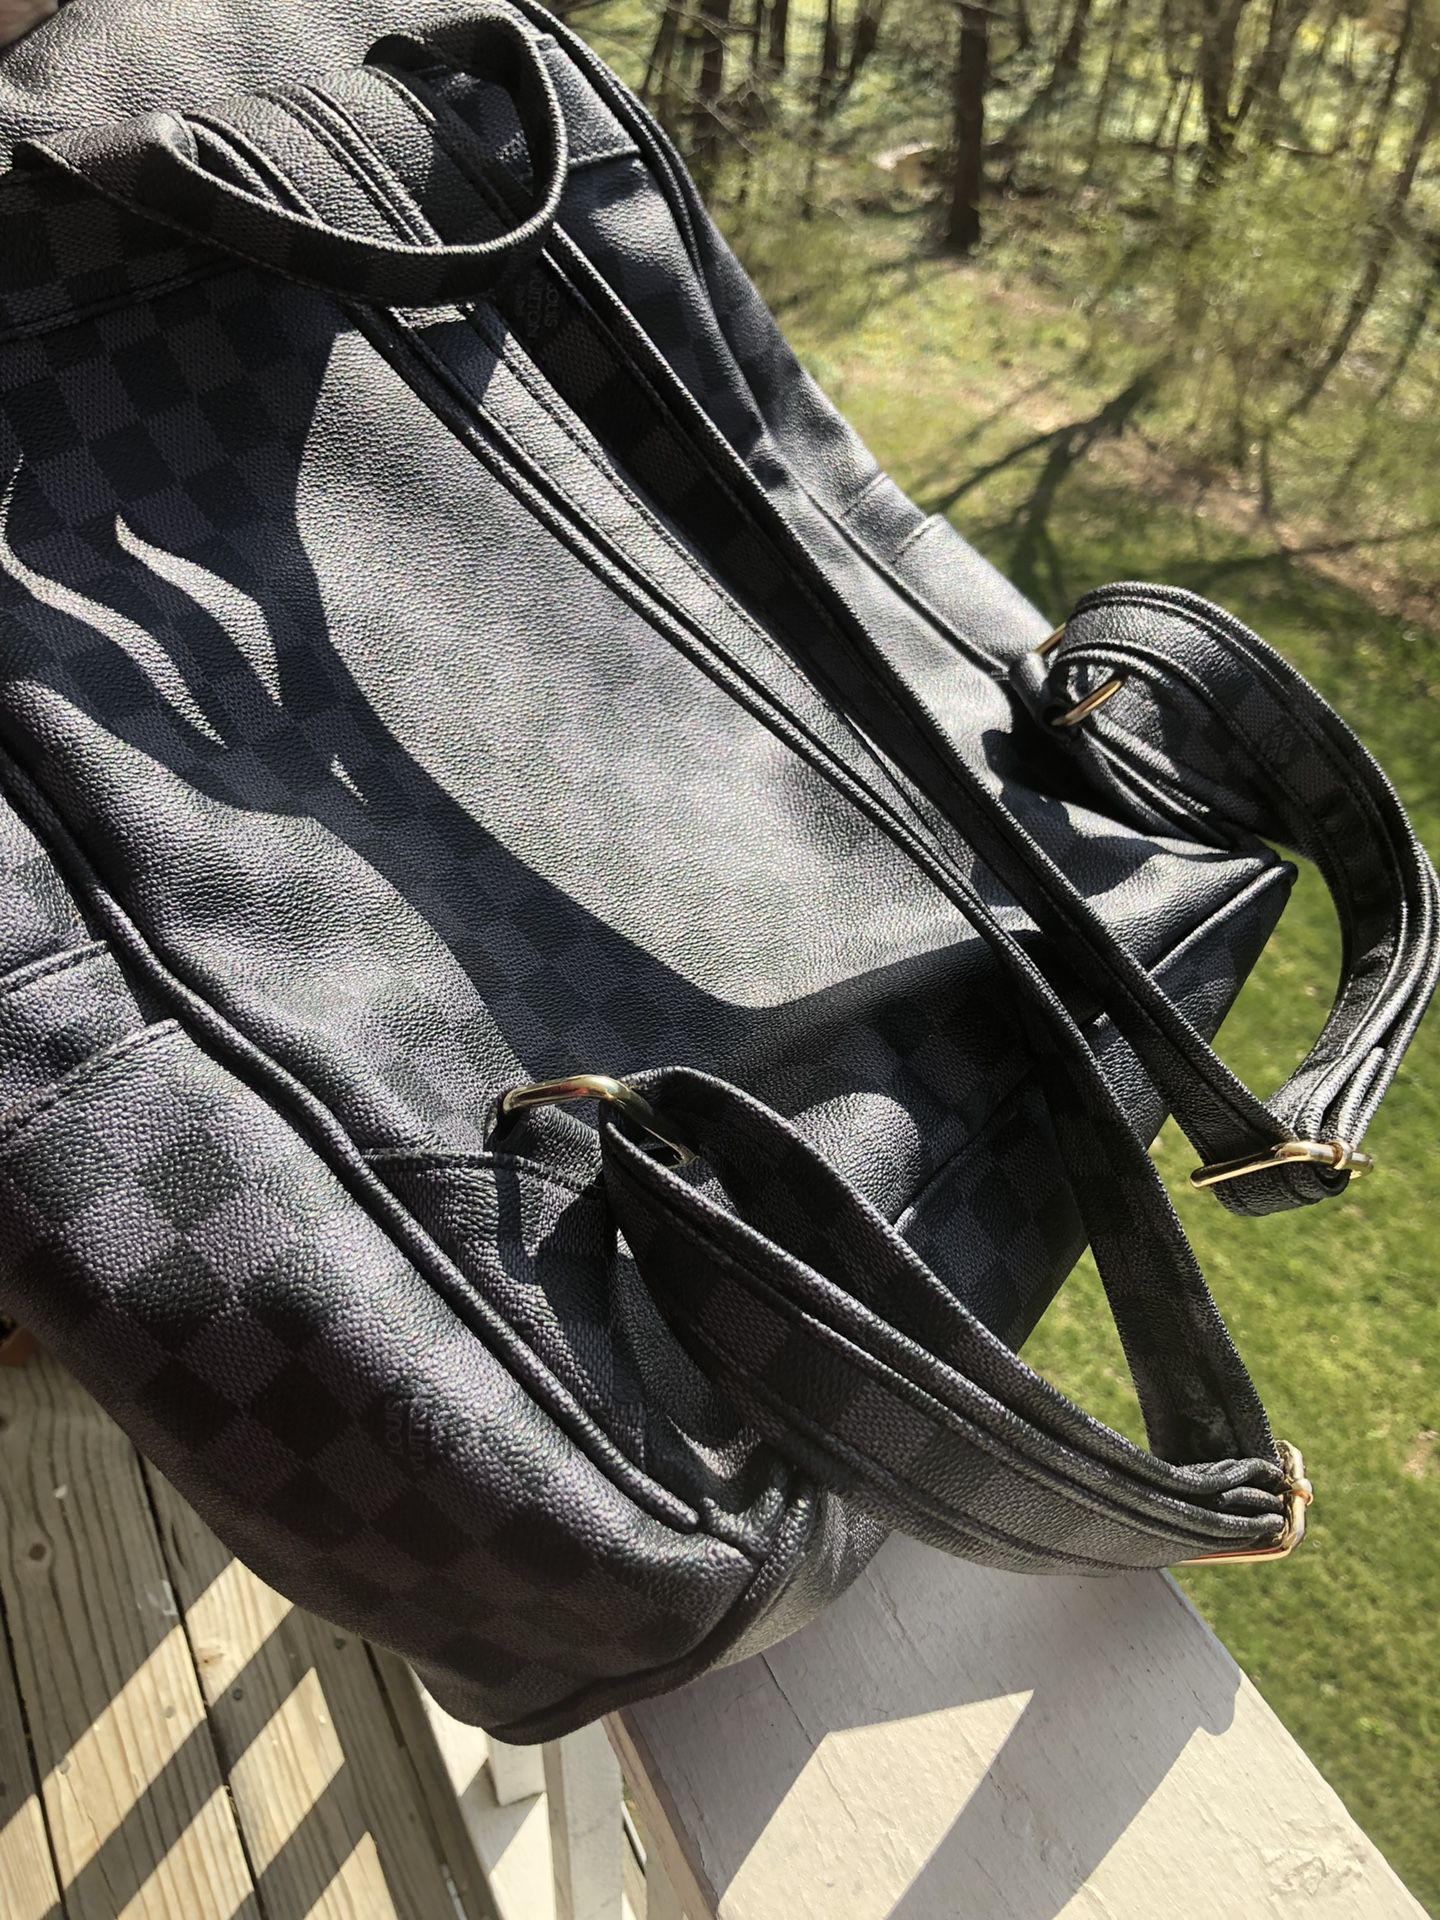 Mens Louis Vuitton Damier Backpack for Sale in Charlotte, NC - OfferUp